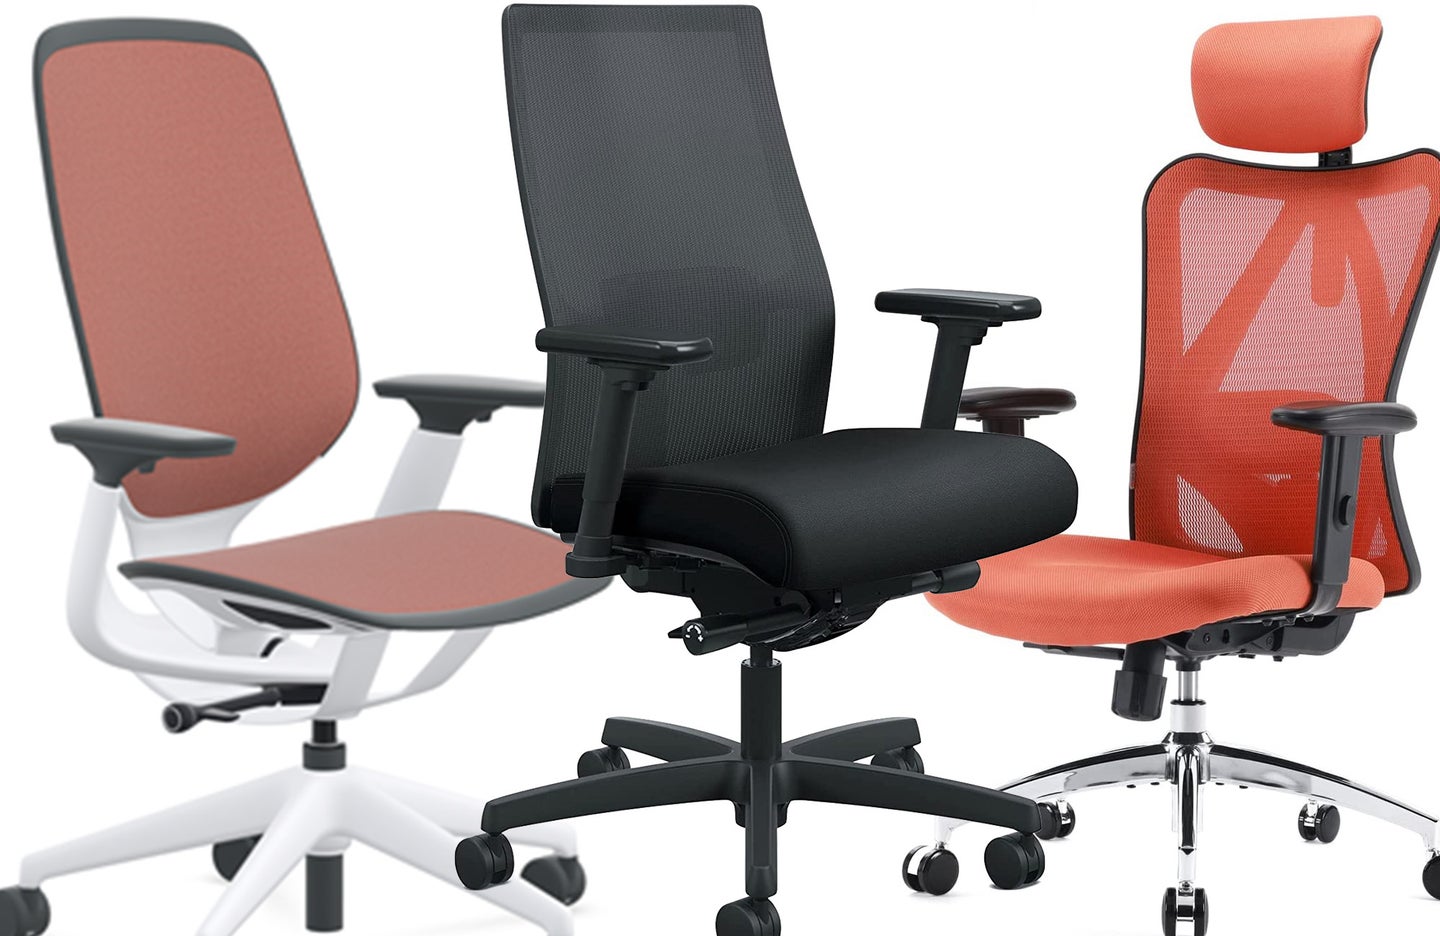 The best ergonomic chairs will help support your body while you work.